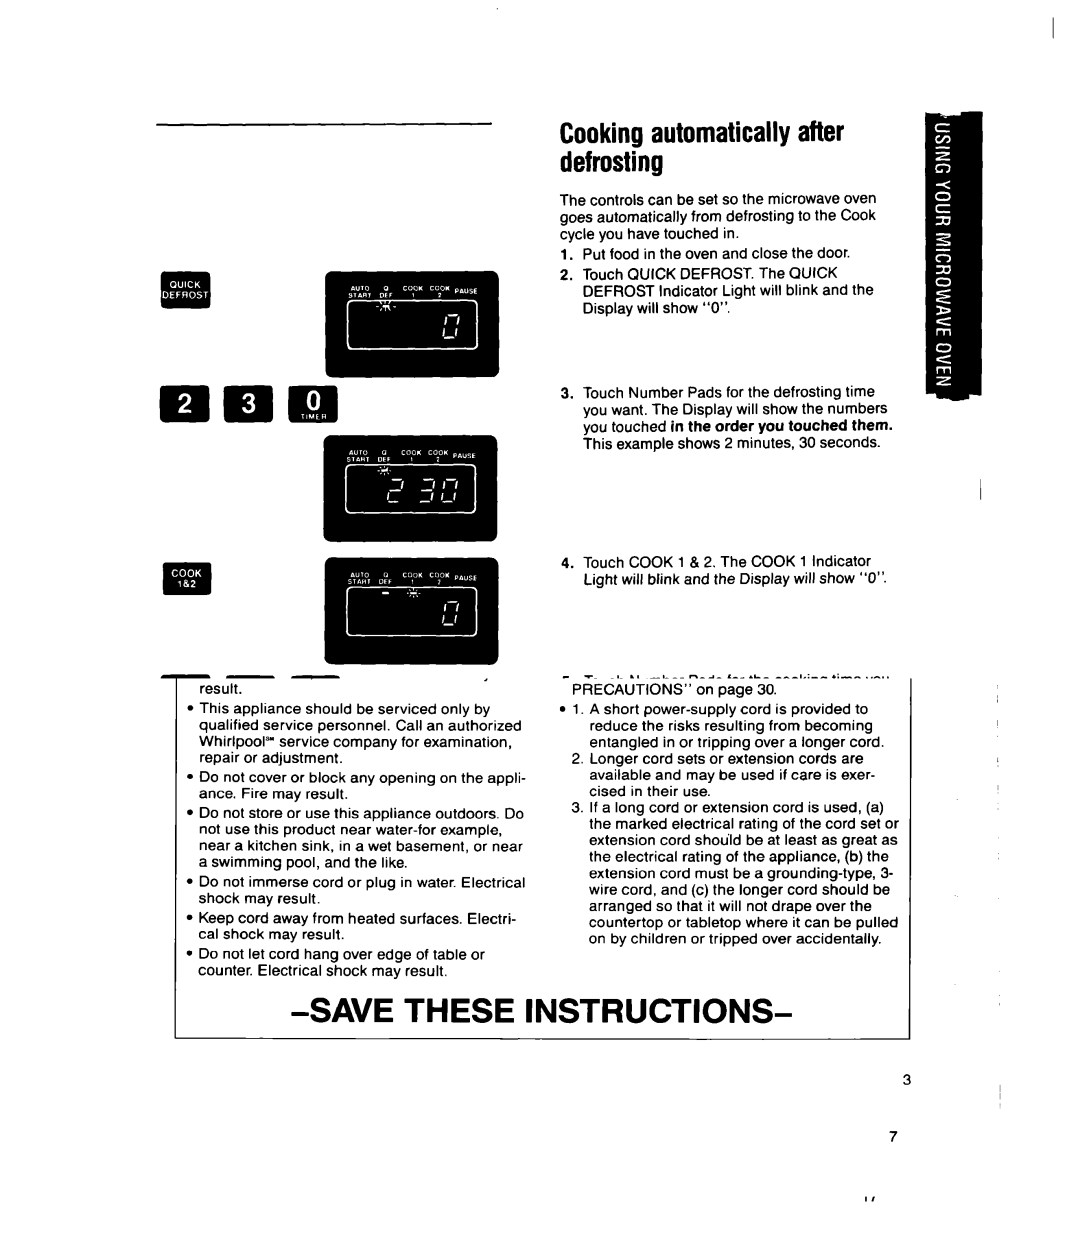 Whirlpool MSI065XY, MSI040XY user manual Cookingautomatically after defrosting, This example shows 4 minutes, 30 seconds 